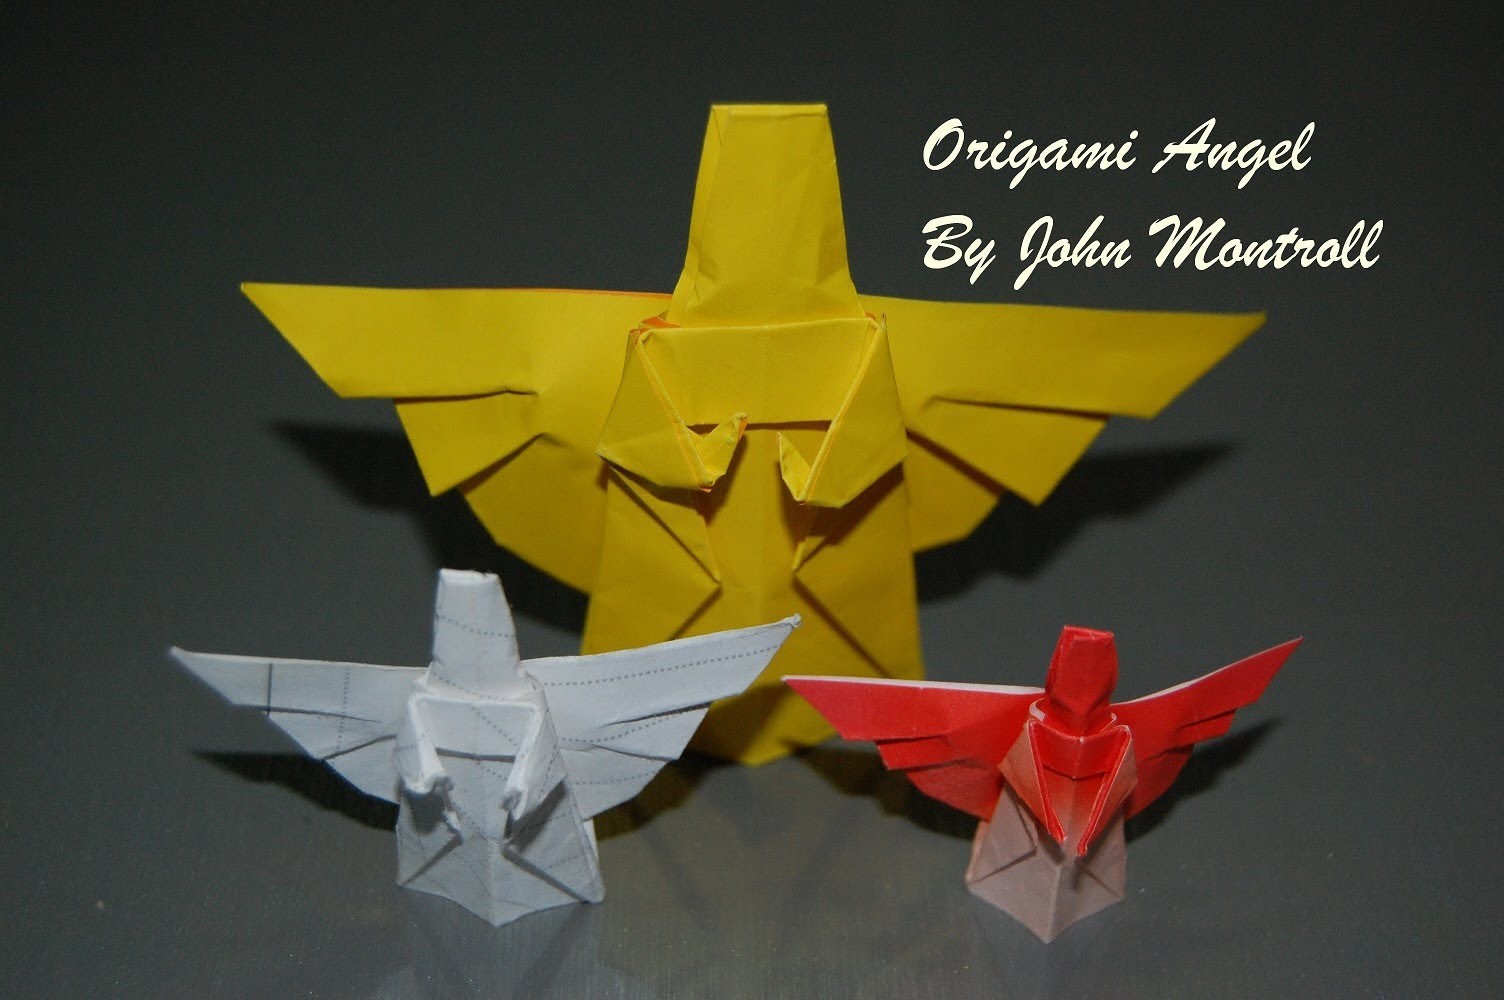 Origami Christmas Angel How to fold an Origami Angel